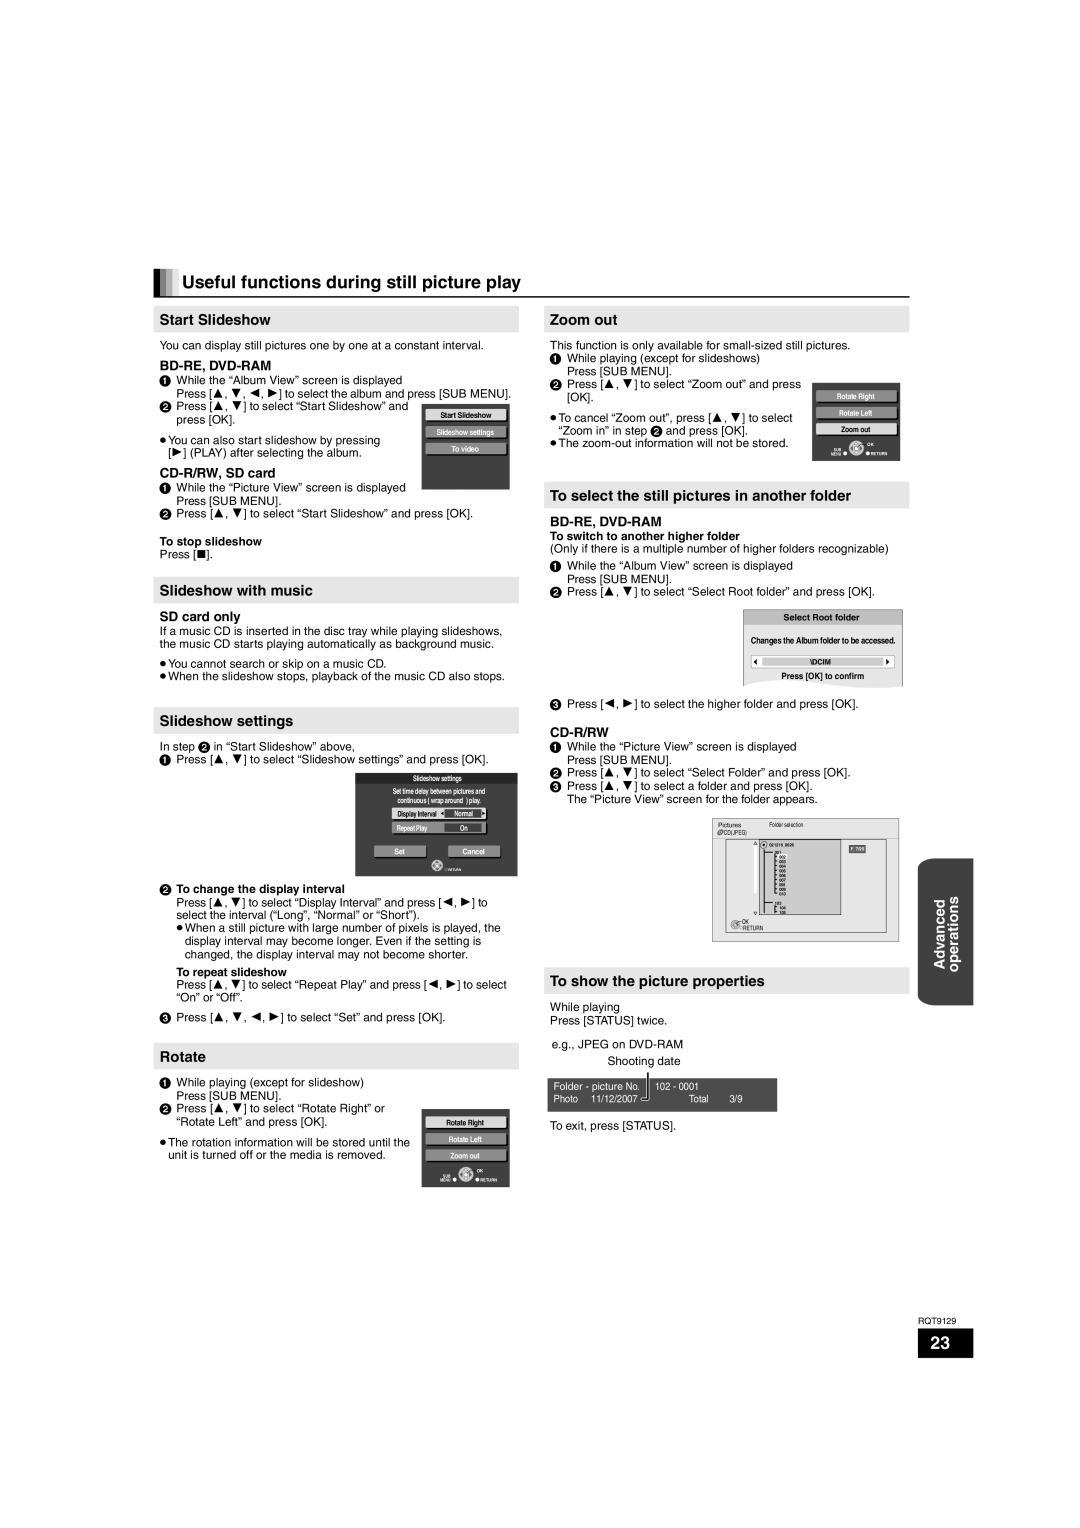 Panasonic SC-BT100 Useful functions during still picture play, Start Slideshow, Zoom out, Slideshow with music, Advanced 